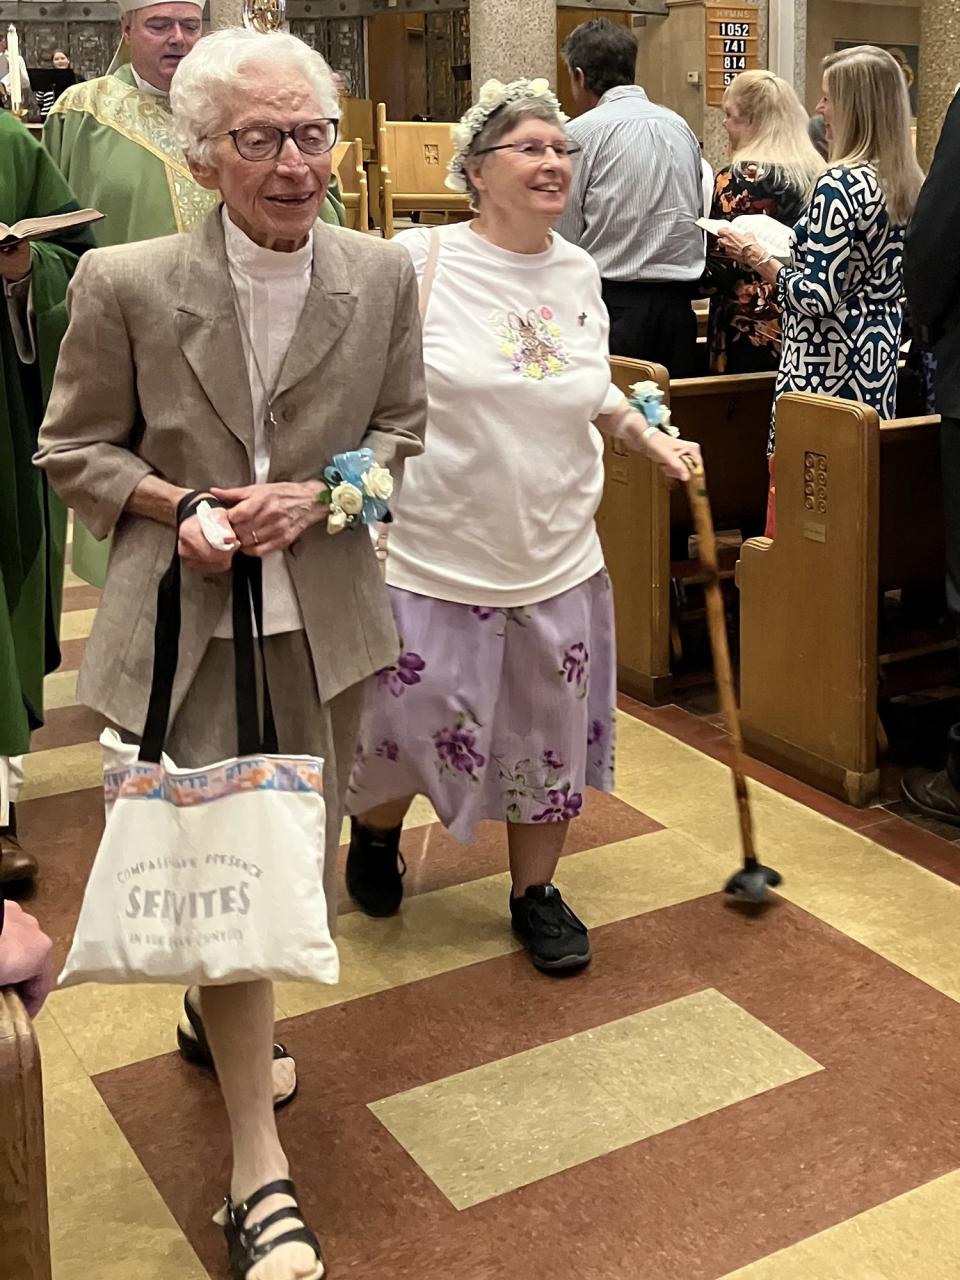 Sisters Mary Peter Caito, 86, (left) and Sr. Kathy Avery, 80, leave church smiling as they celebrate their farewell celebration at St. Clare Montefalco Catholic Church in Grosse Pointe Park. Avery and Caito, who dedicated 16 years of service to St. Clare's school, are leaving Michigan and headed back to their motherhouse in Omaha, Nebraska.